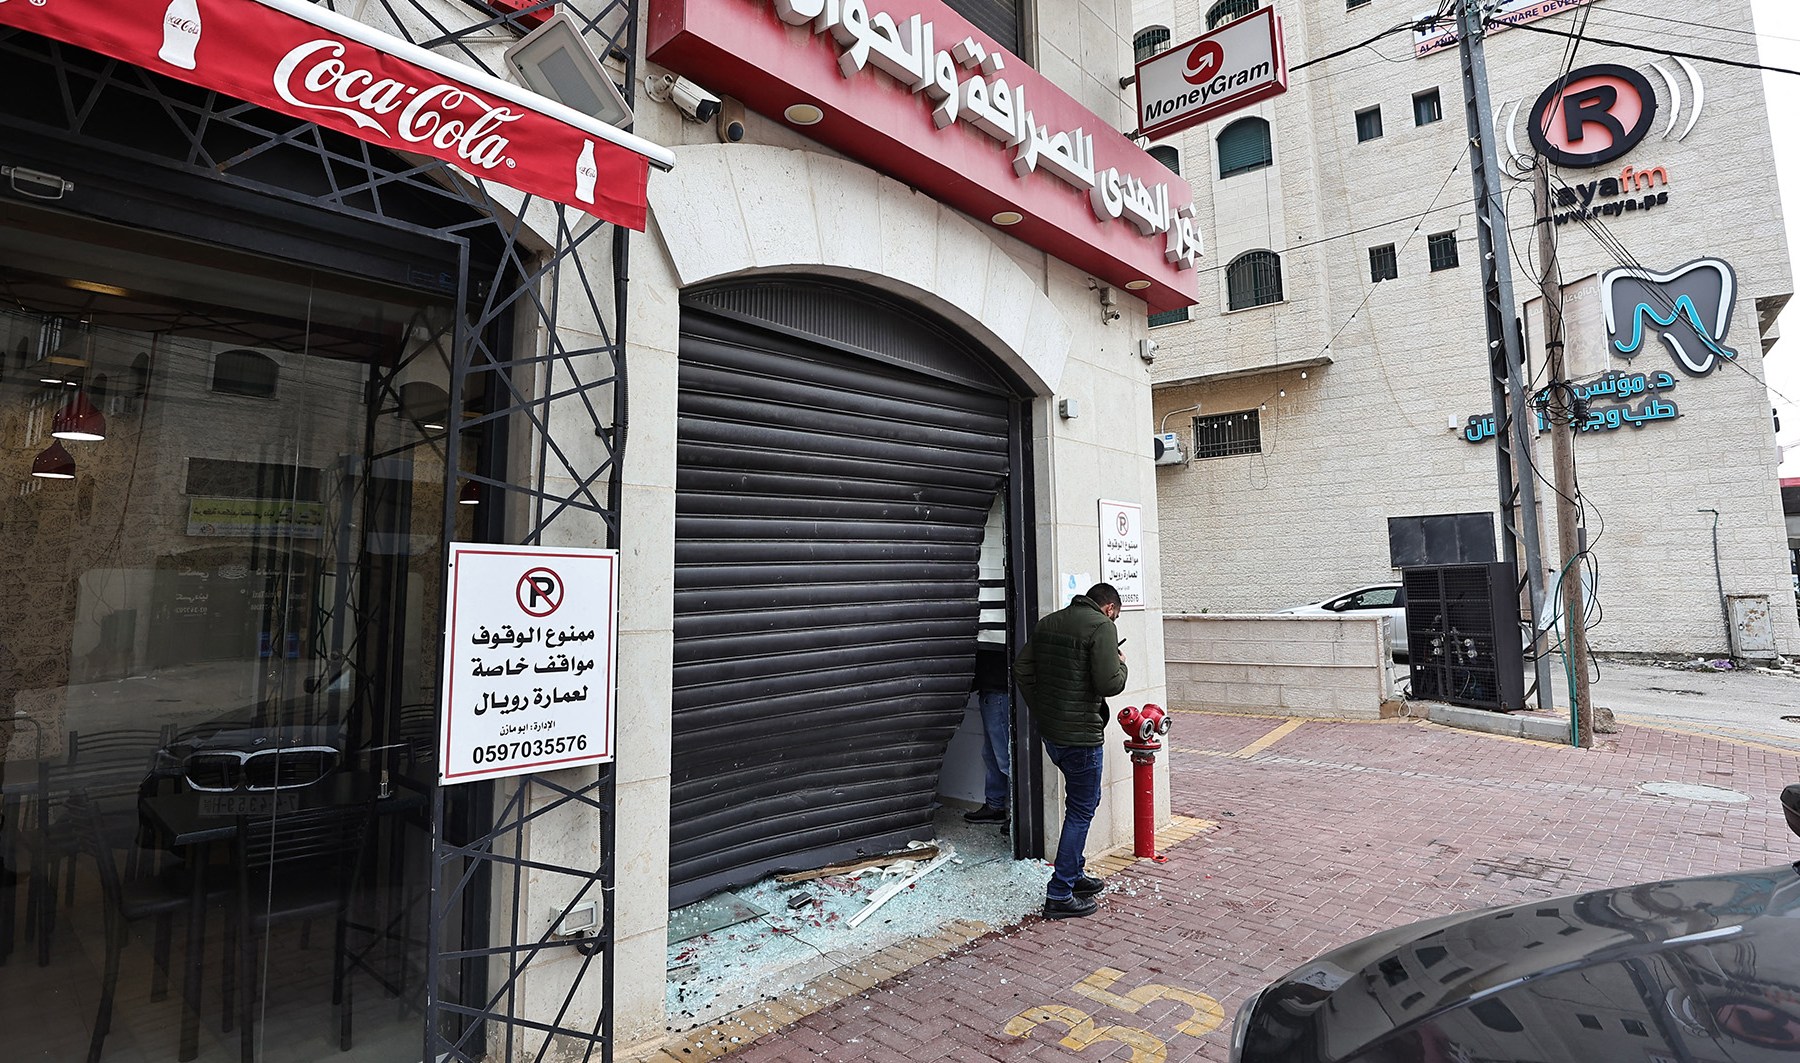 Israeli forces confiscate cash during raids in occupied West Bank | Israel-Palestine conflict